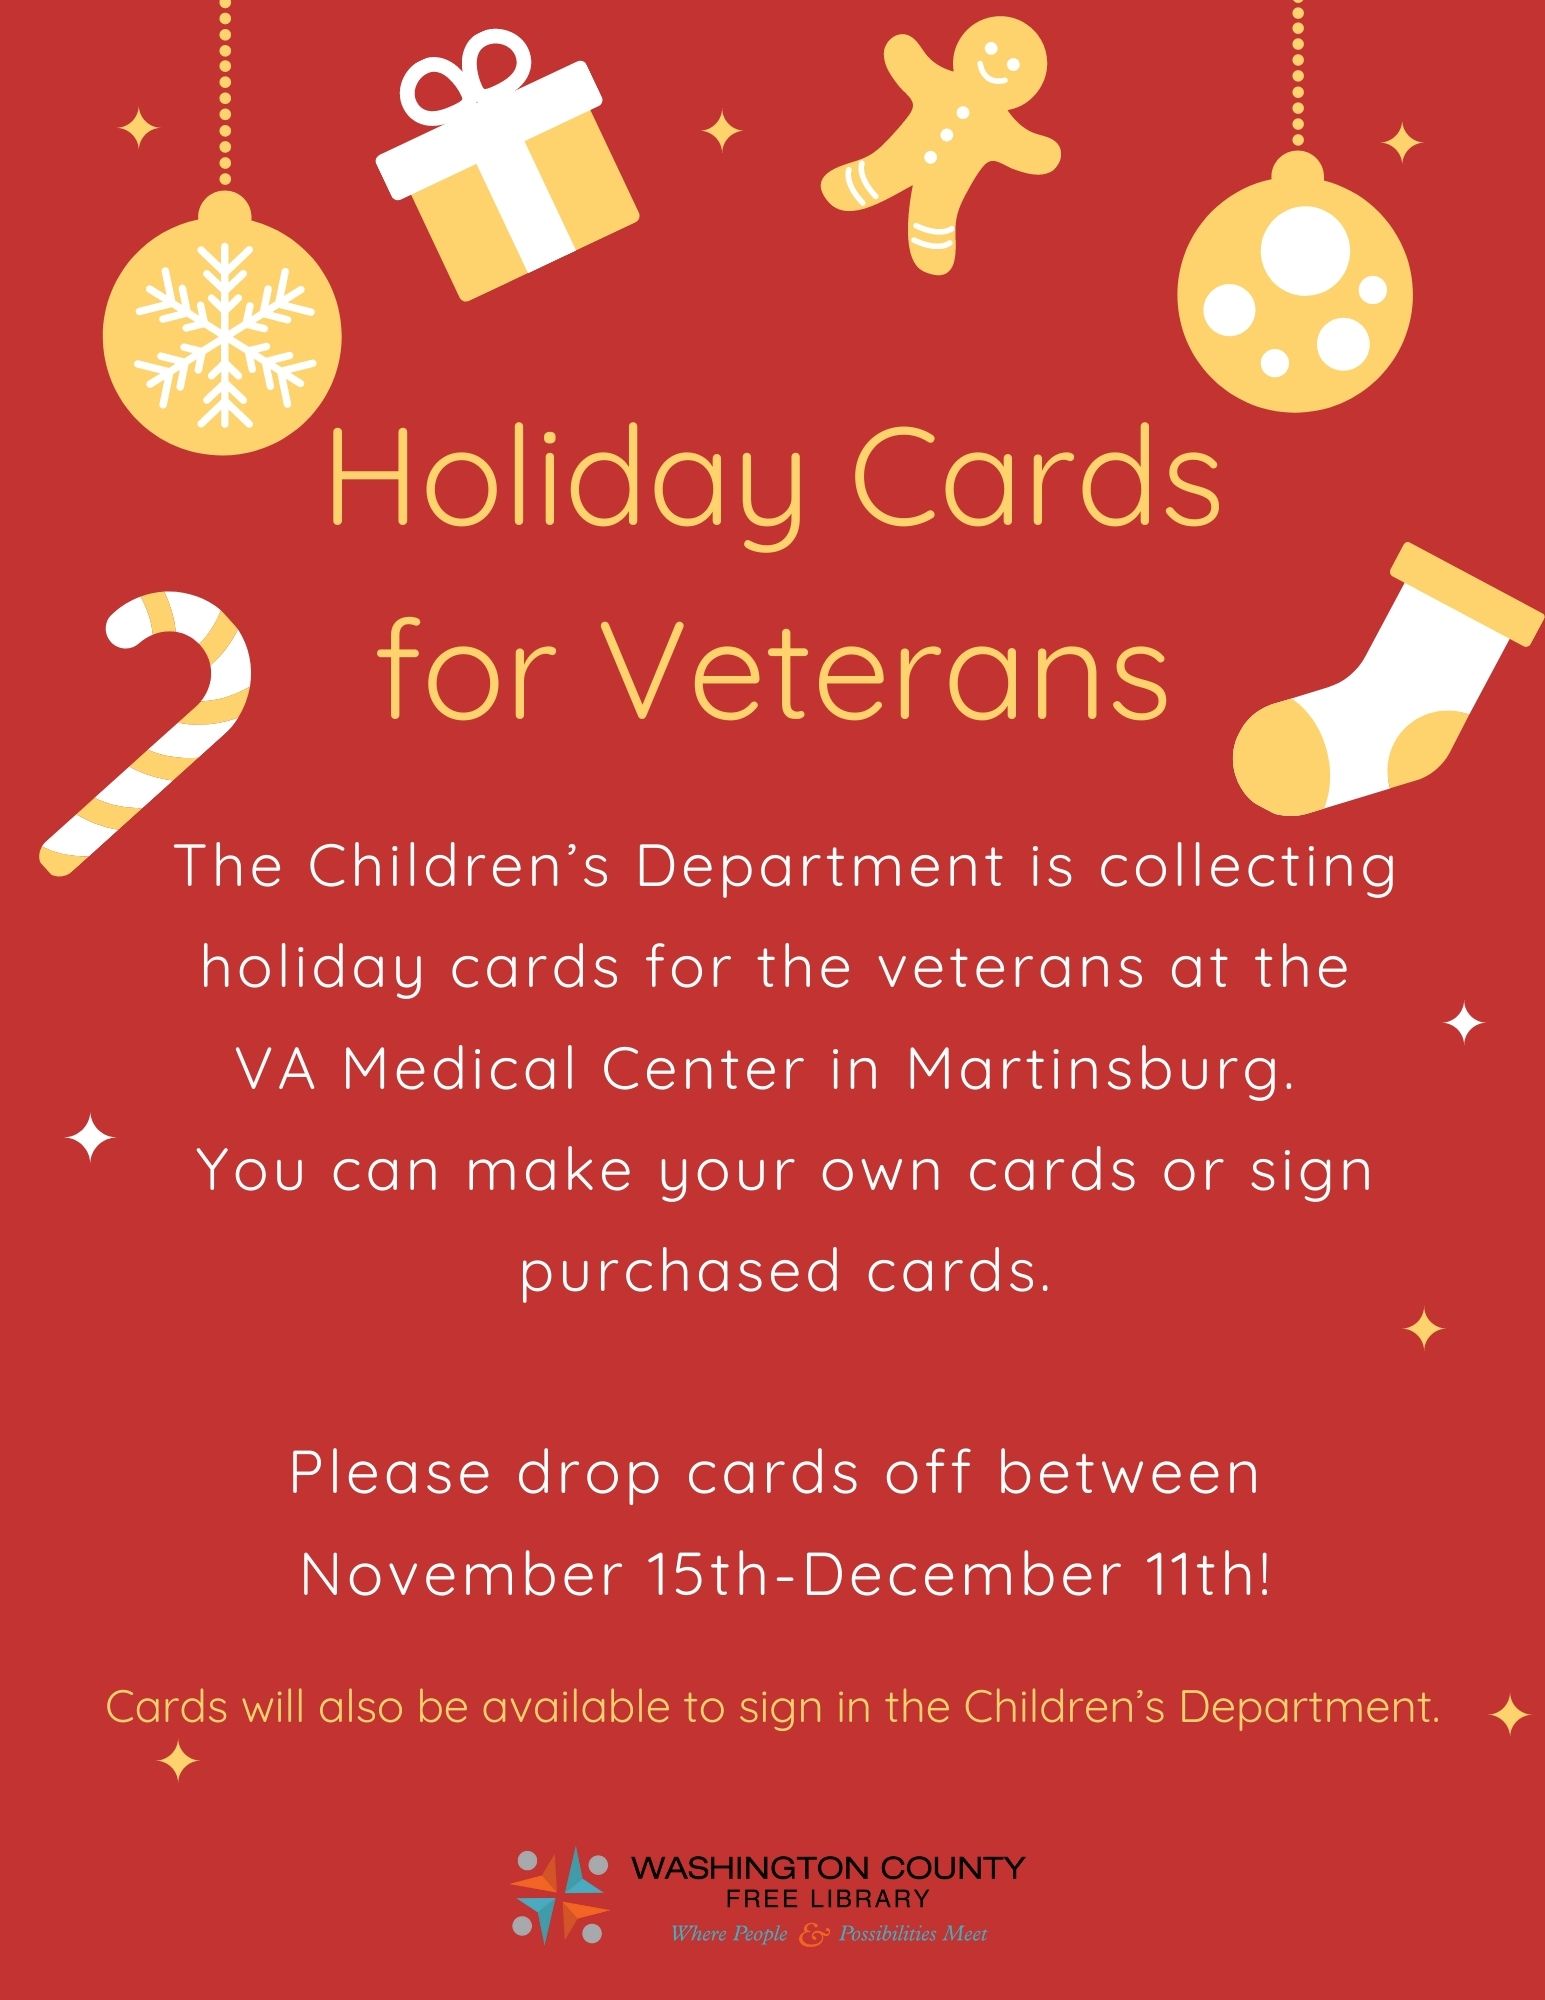 cards for the VA center